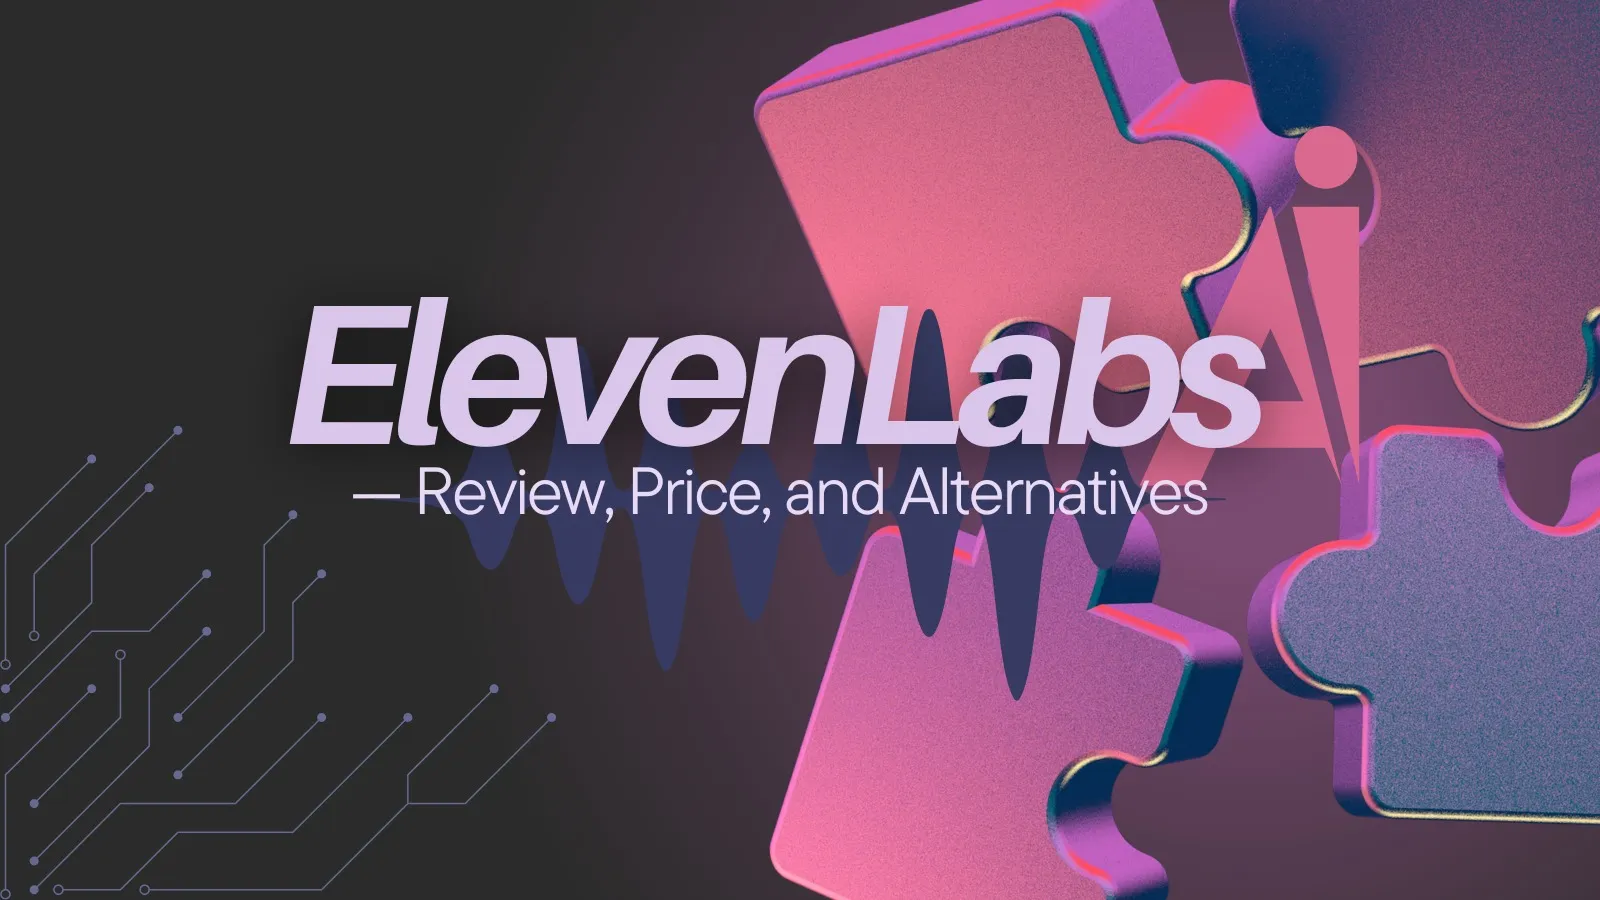 Eleven Labs AI - Review, Price and Alternatives